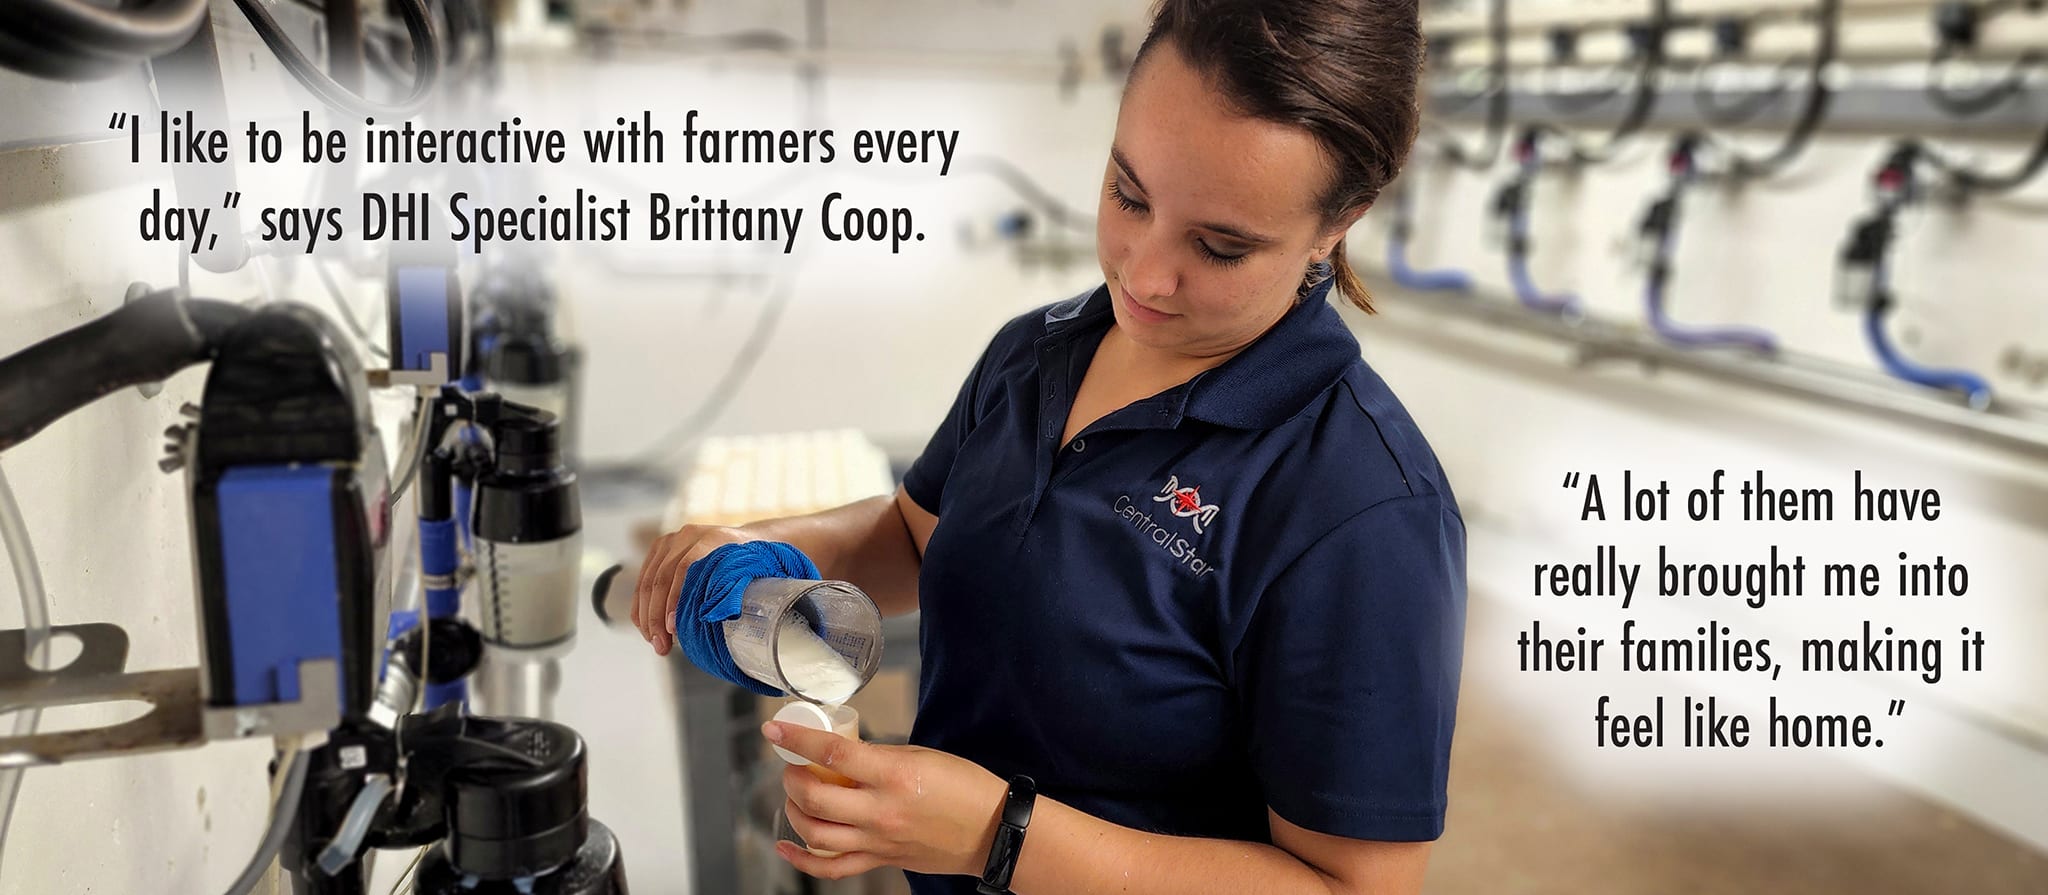 DHI-Specialist-Brittany-Coop-likes-working-with-her-farmers-at-CentralStar